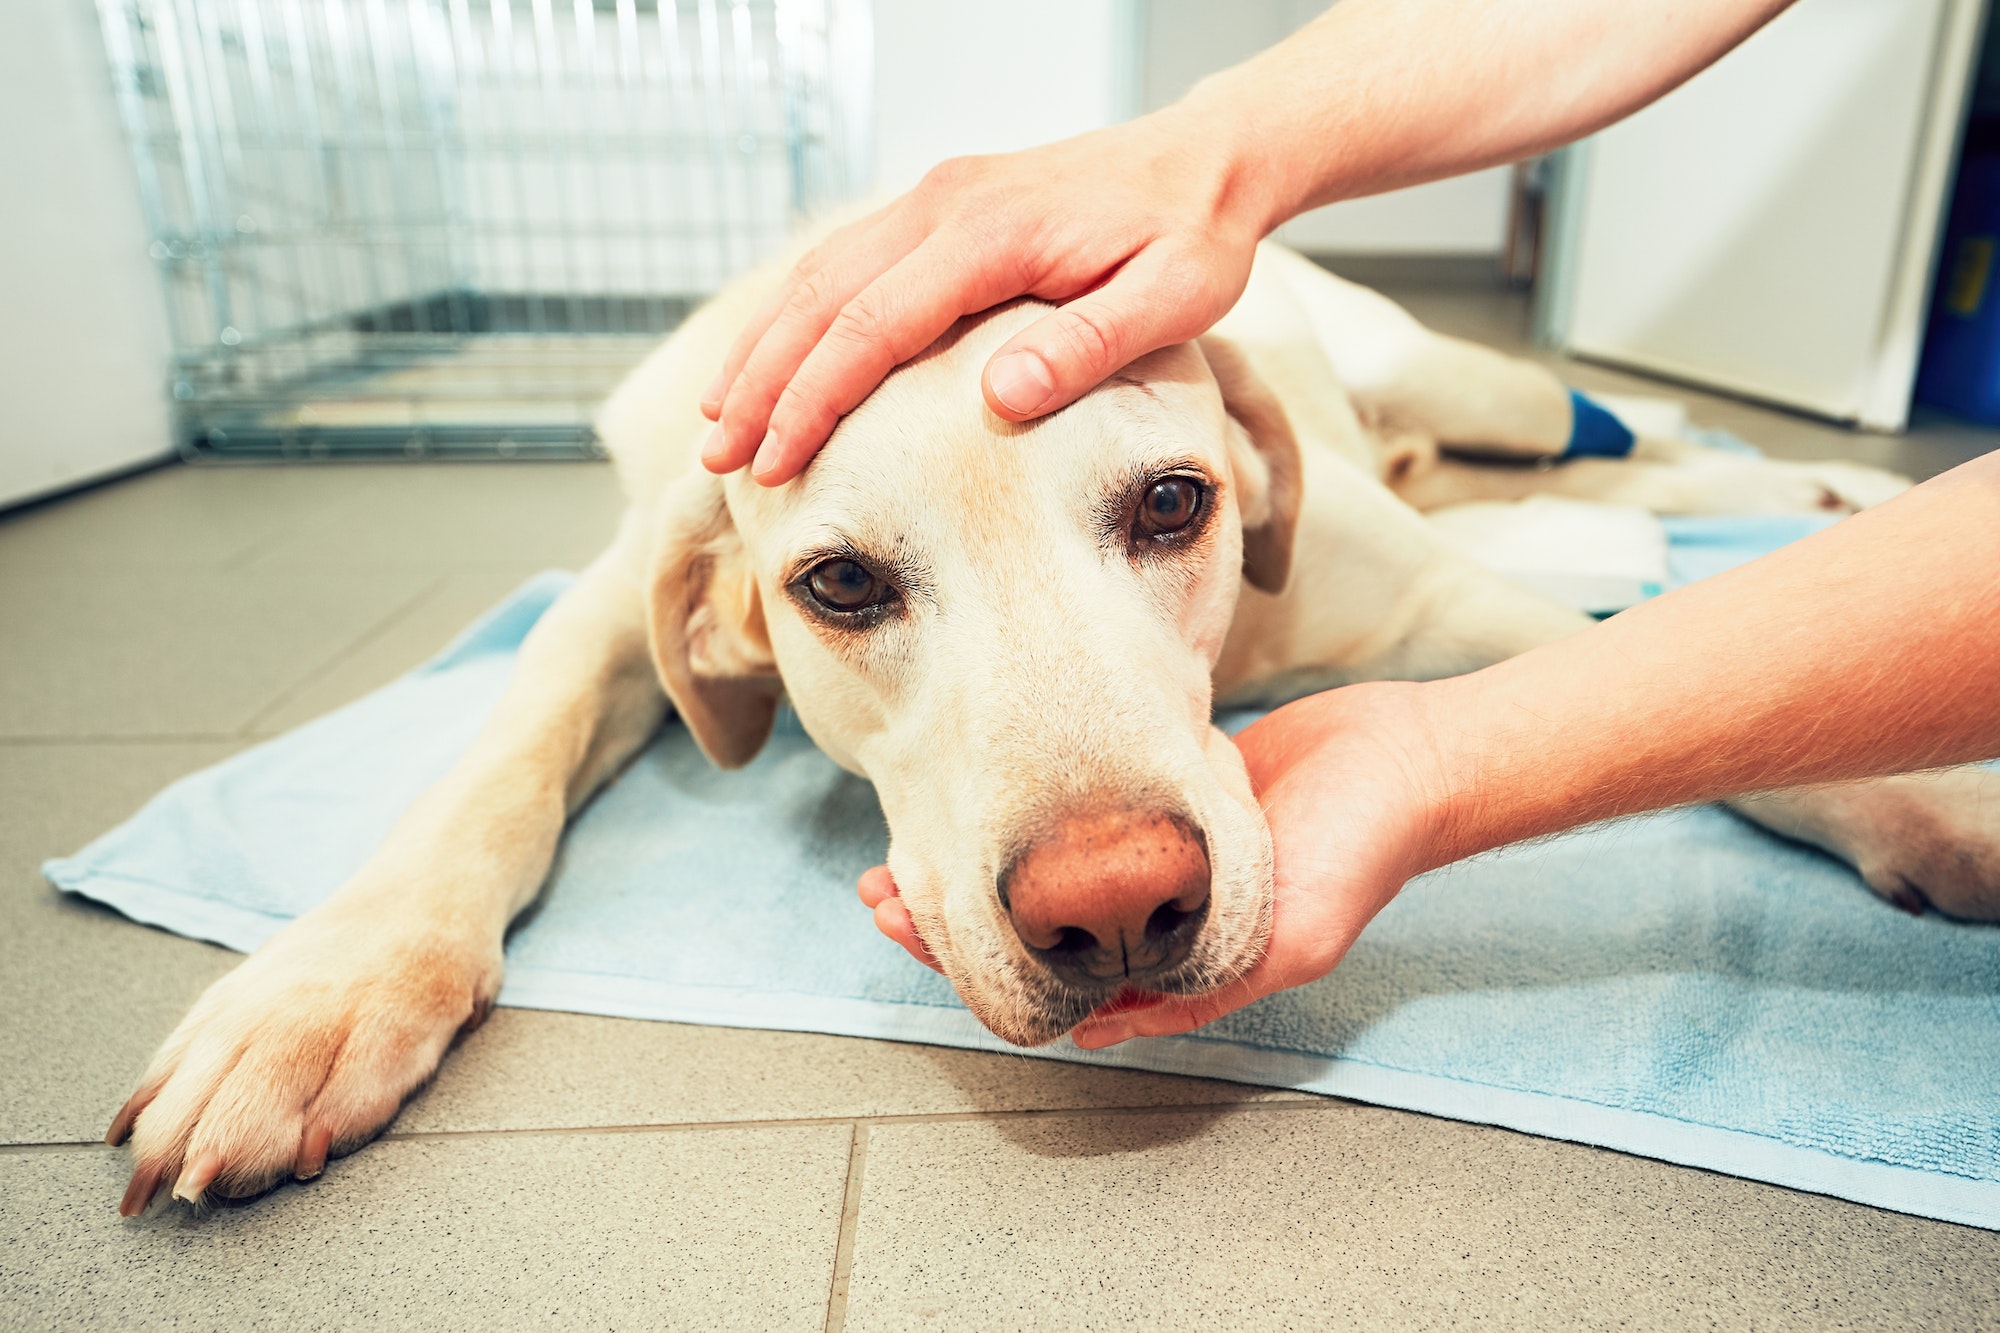 Dog awakening from anesthesia after tumor surgery. Ill labrador retriever in veterinary clinic.